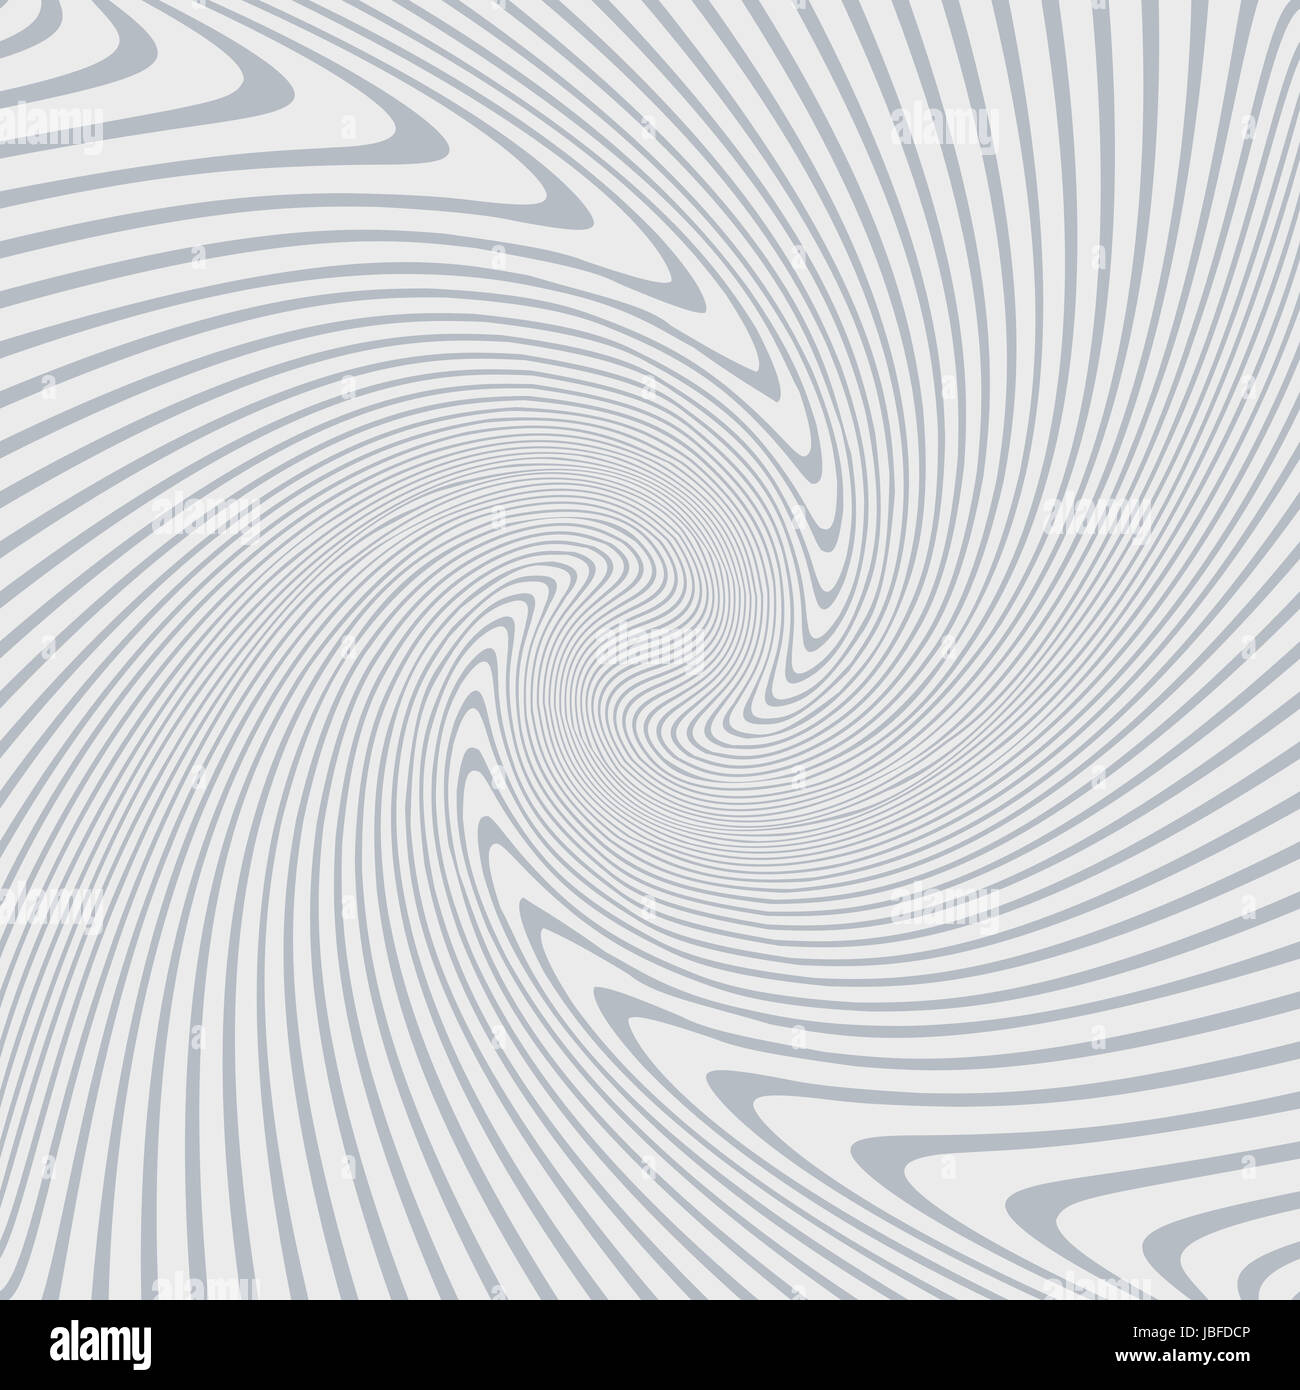 Abstract background of distorted lines in grey and white Stock Photo